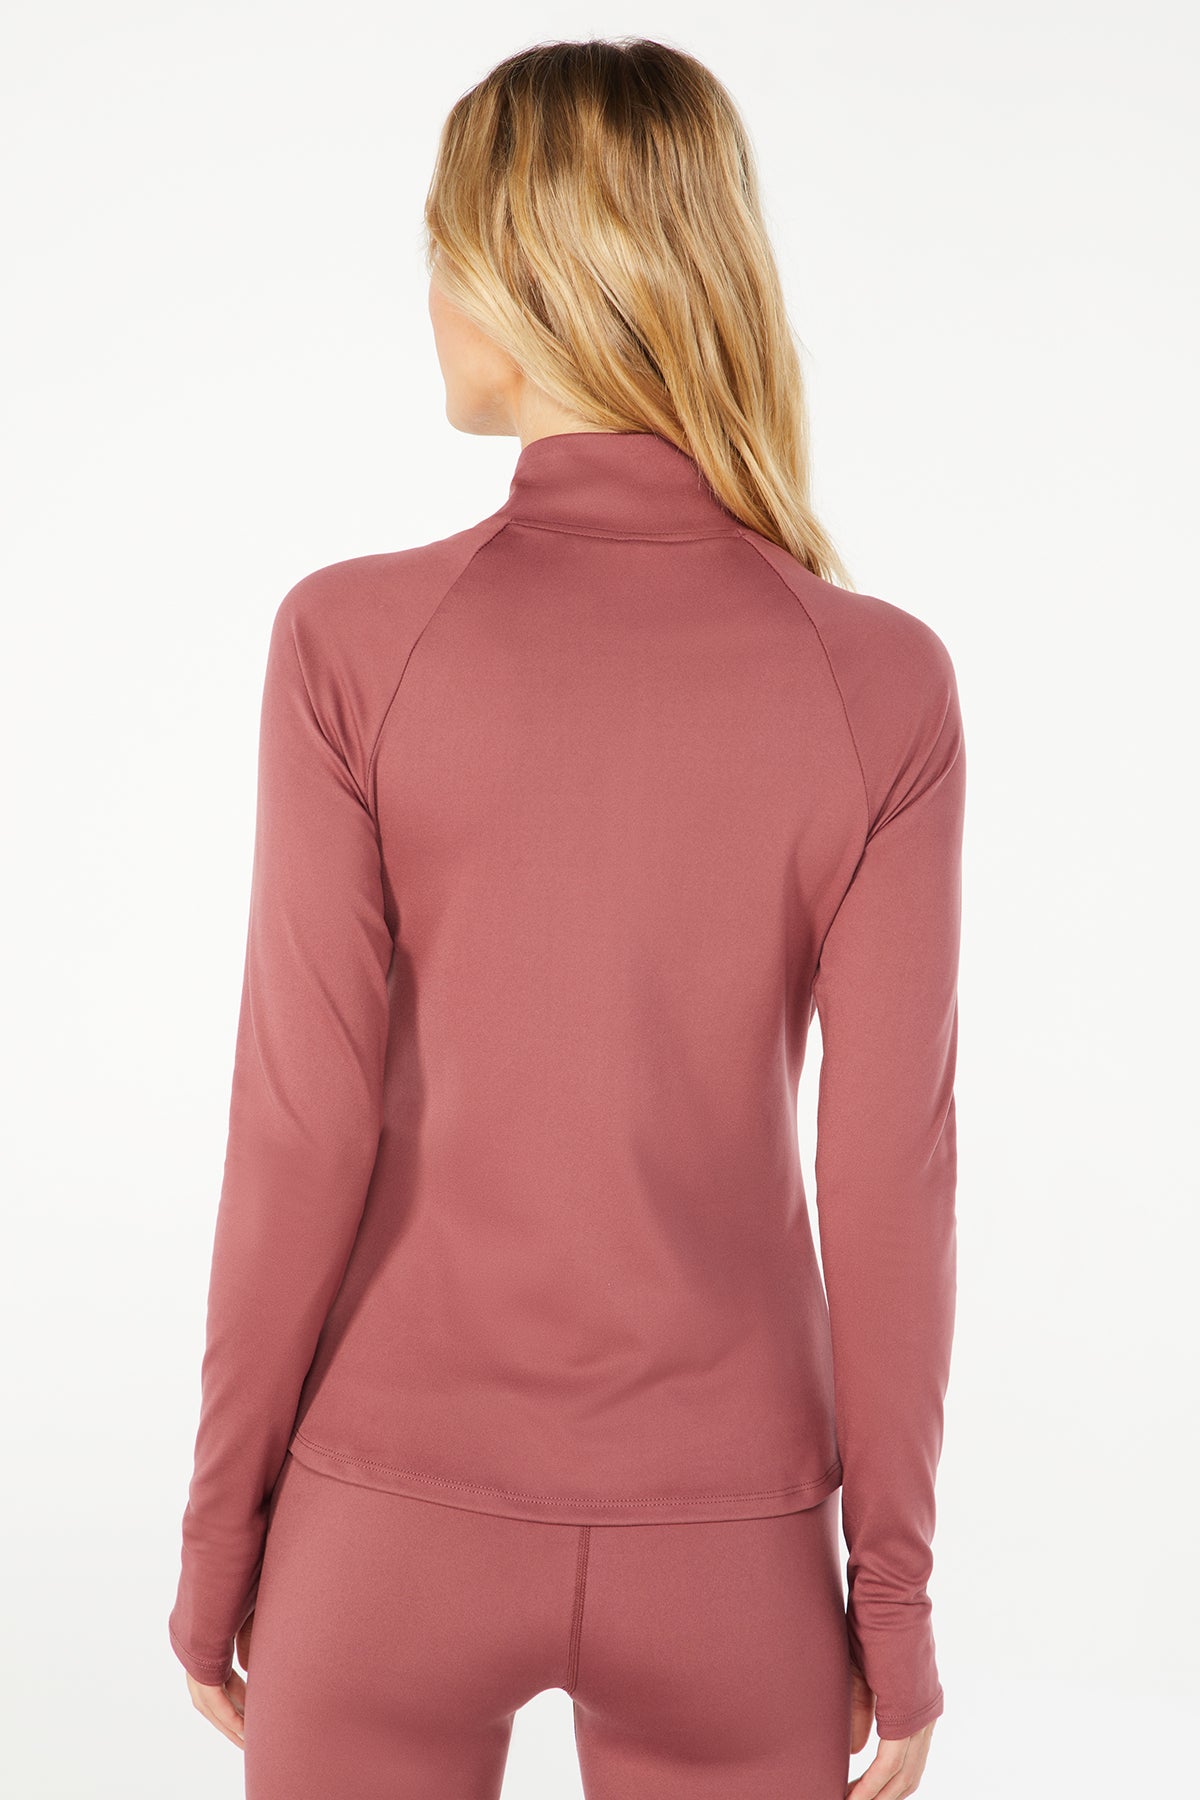 Essential Yoga Jacket (Crushed Berry)